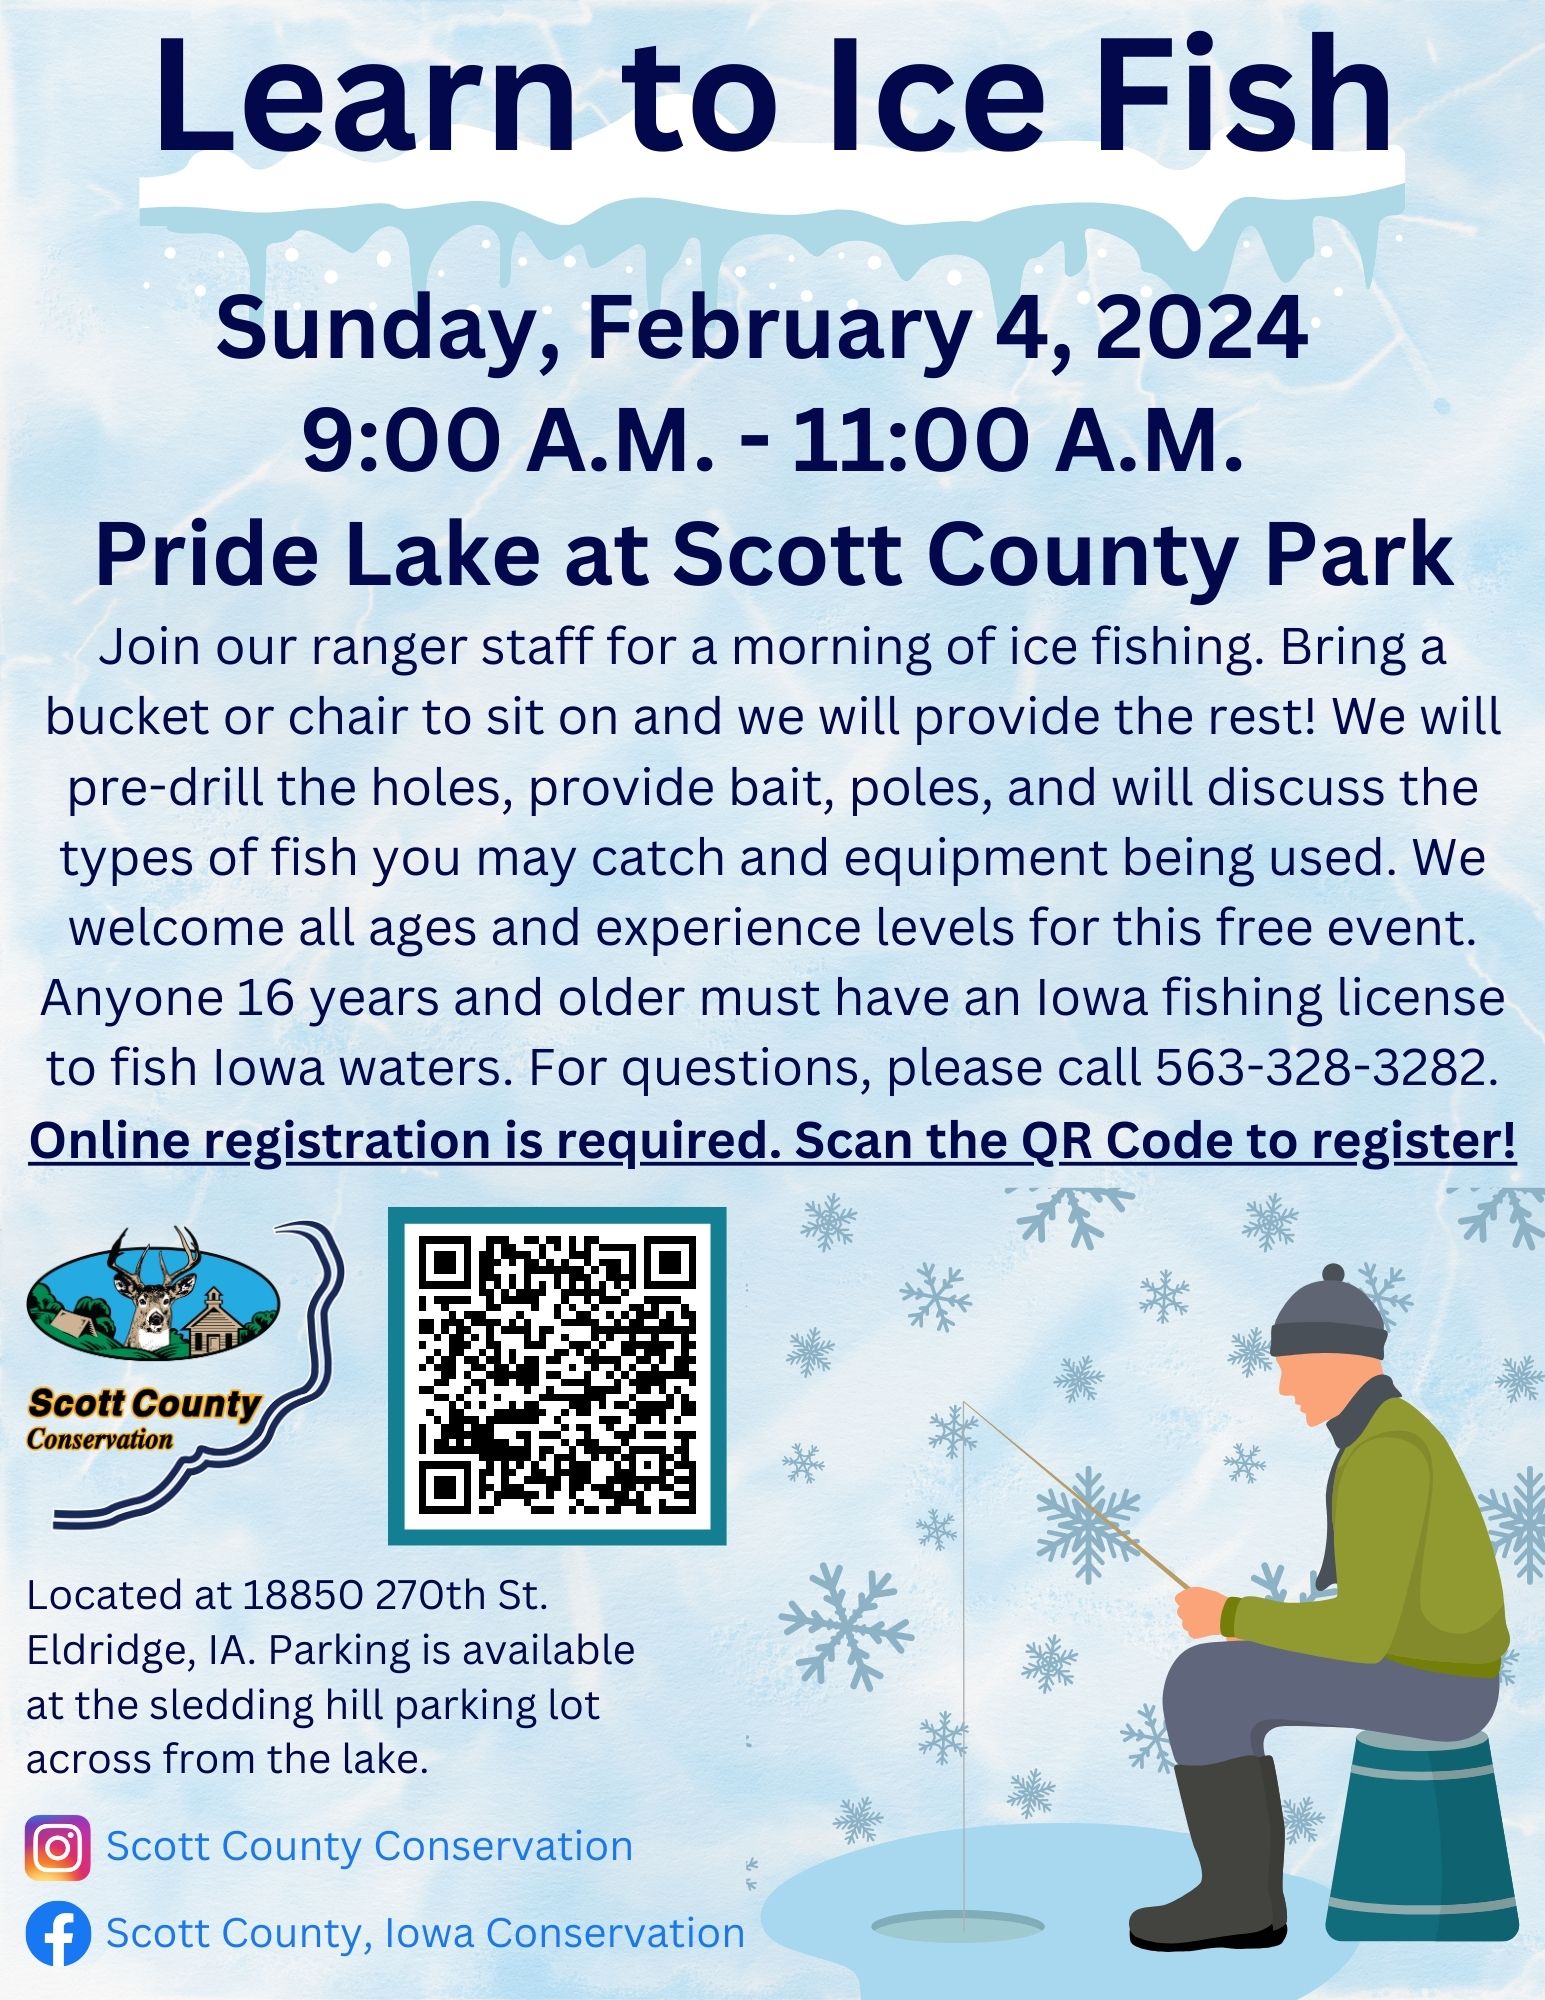 Learn to Ice Fish - Pride Lake at Scott County Park